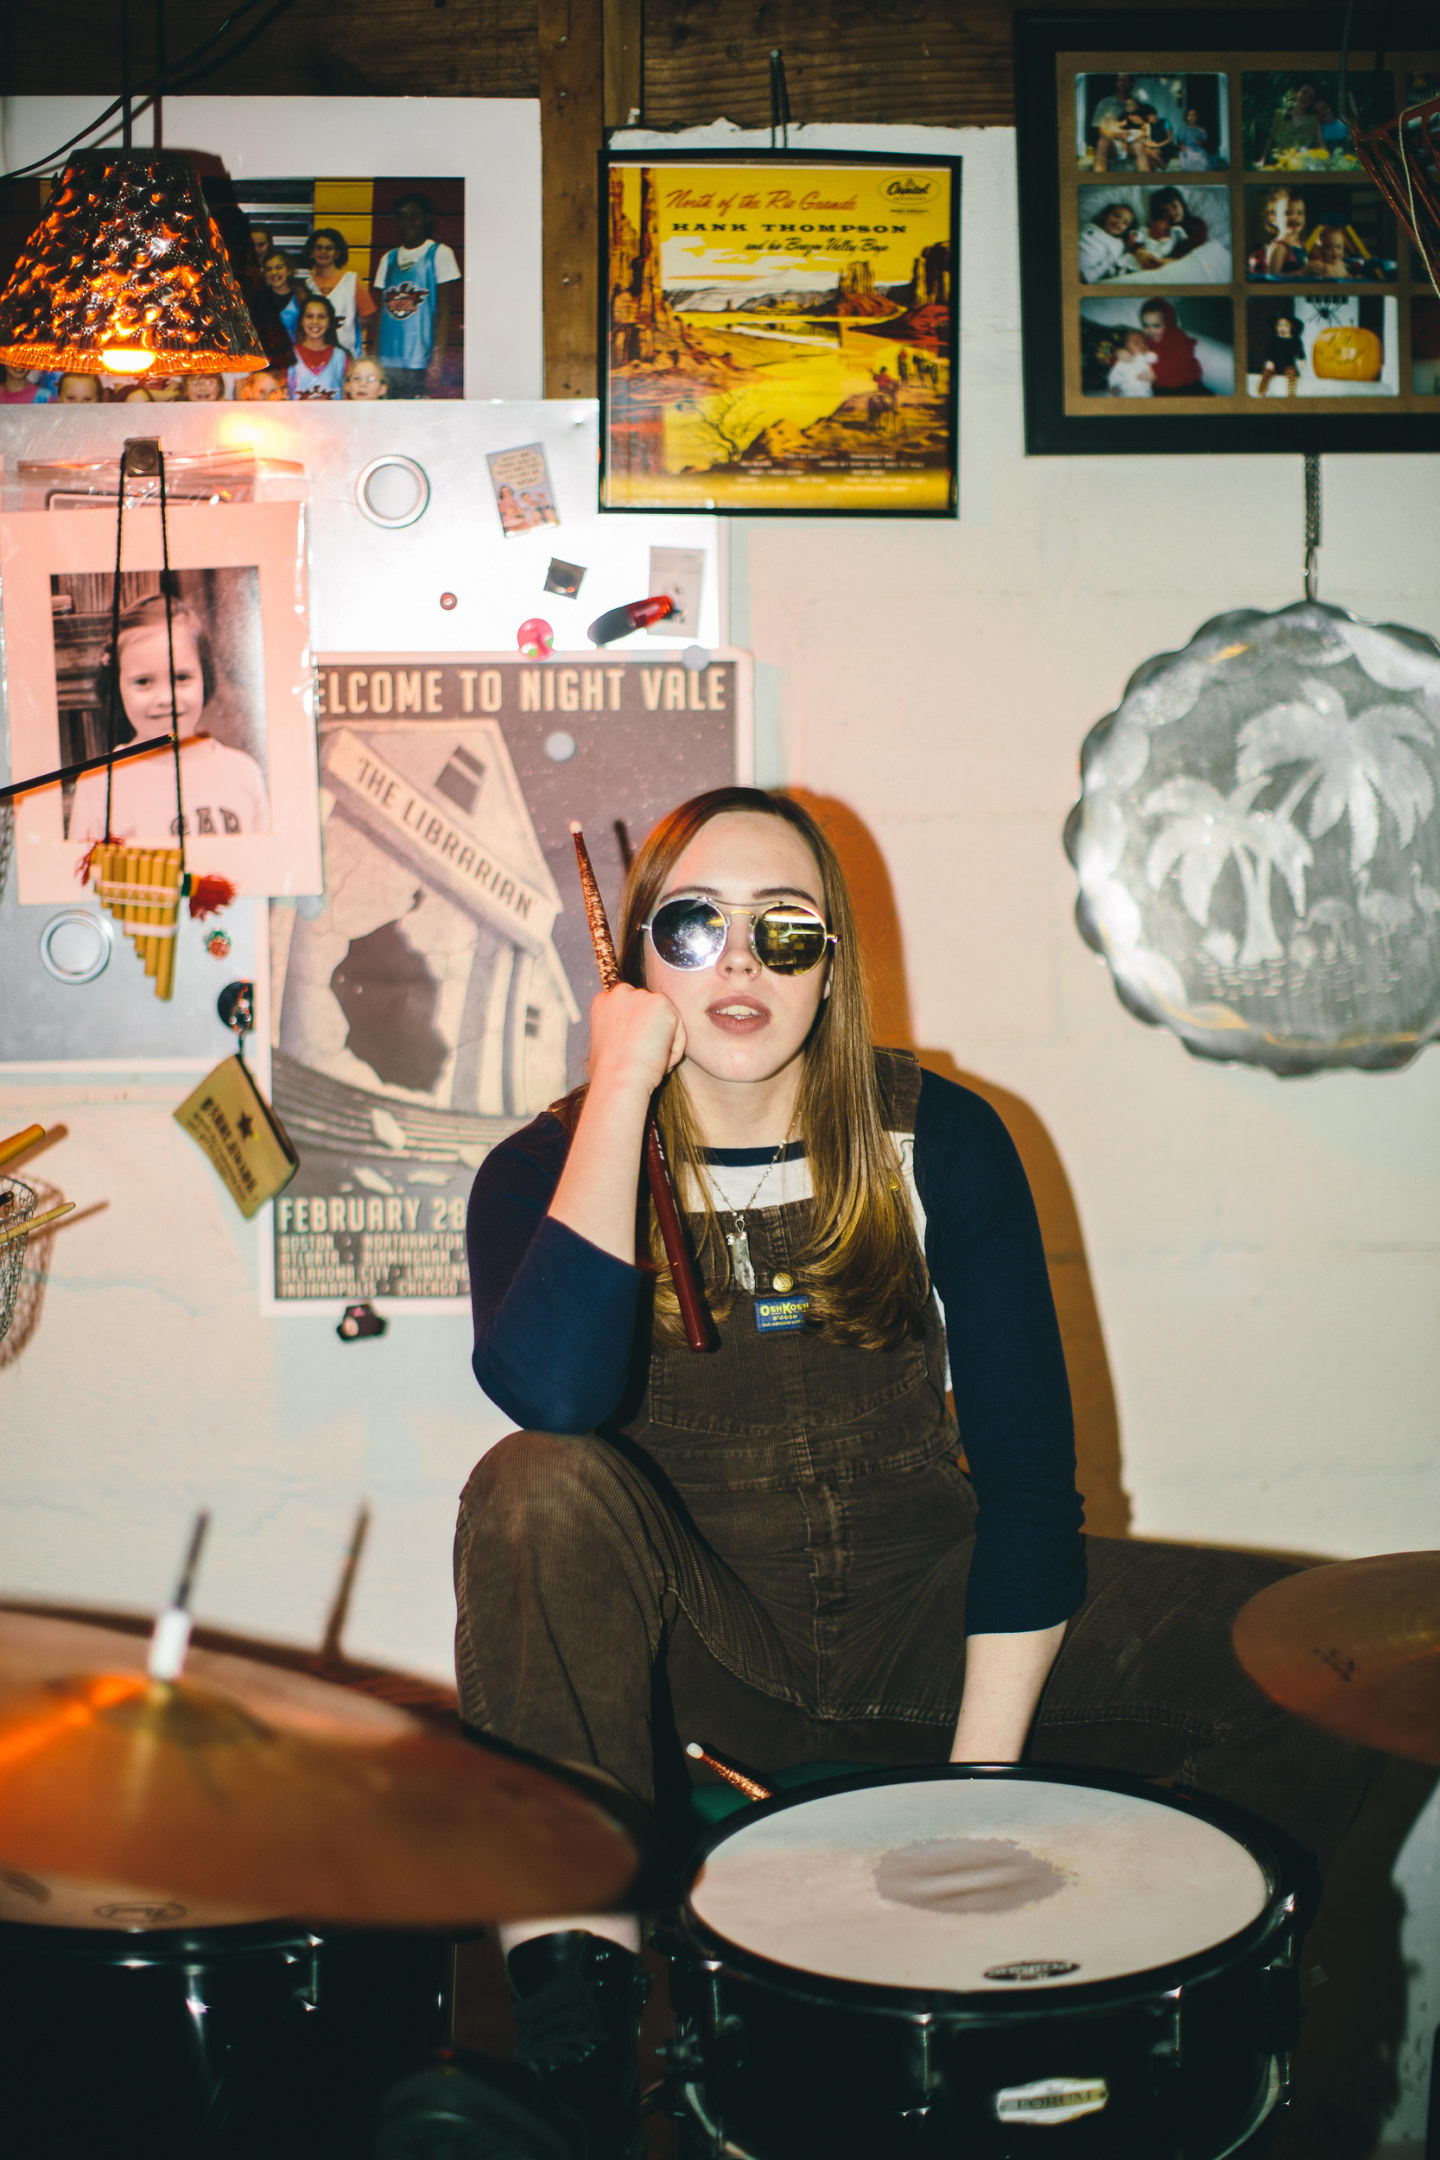 Soccer Mommy is 2018’s chillest new rock star 